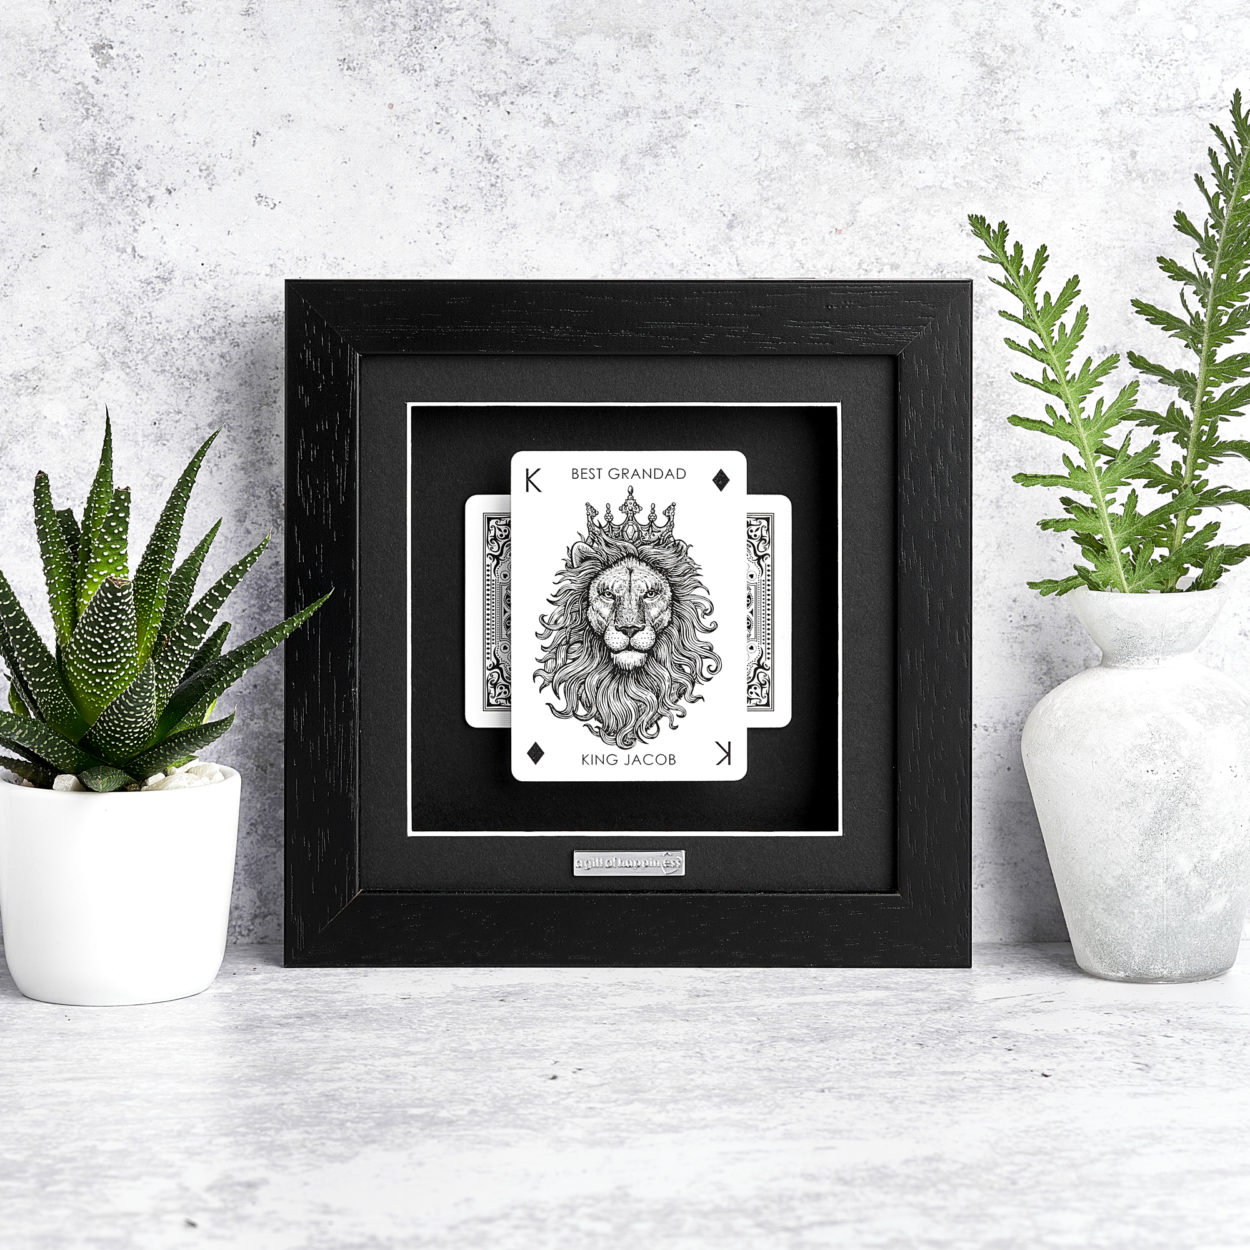 Best Grandad Personalised Lion Playing Card 3D Gift Frame HEADON SQ.blk